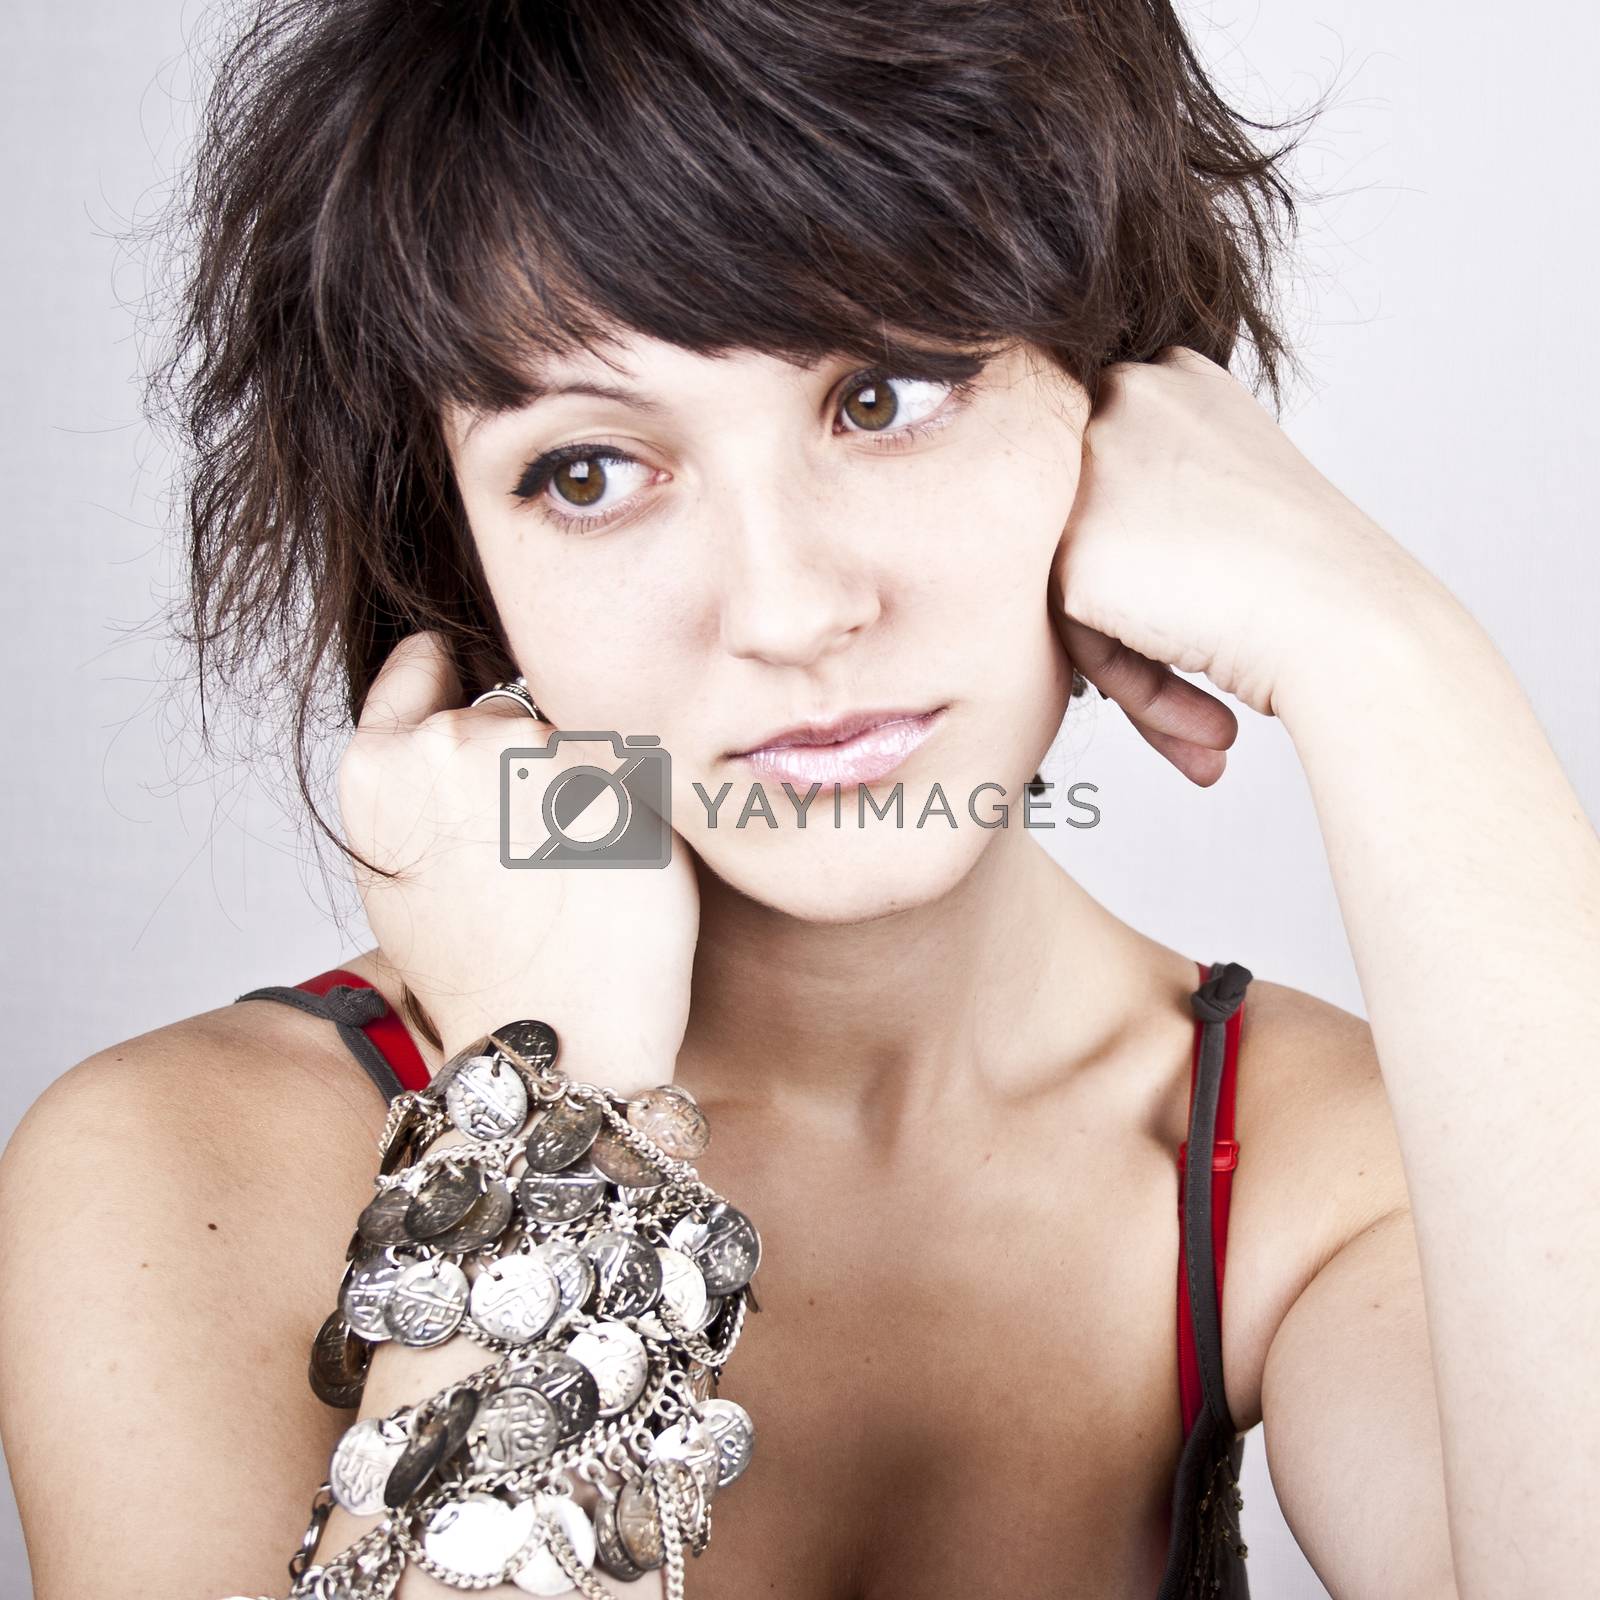 Royalty free image of Brunet woman with bracelets. by marylooo